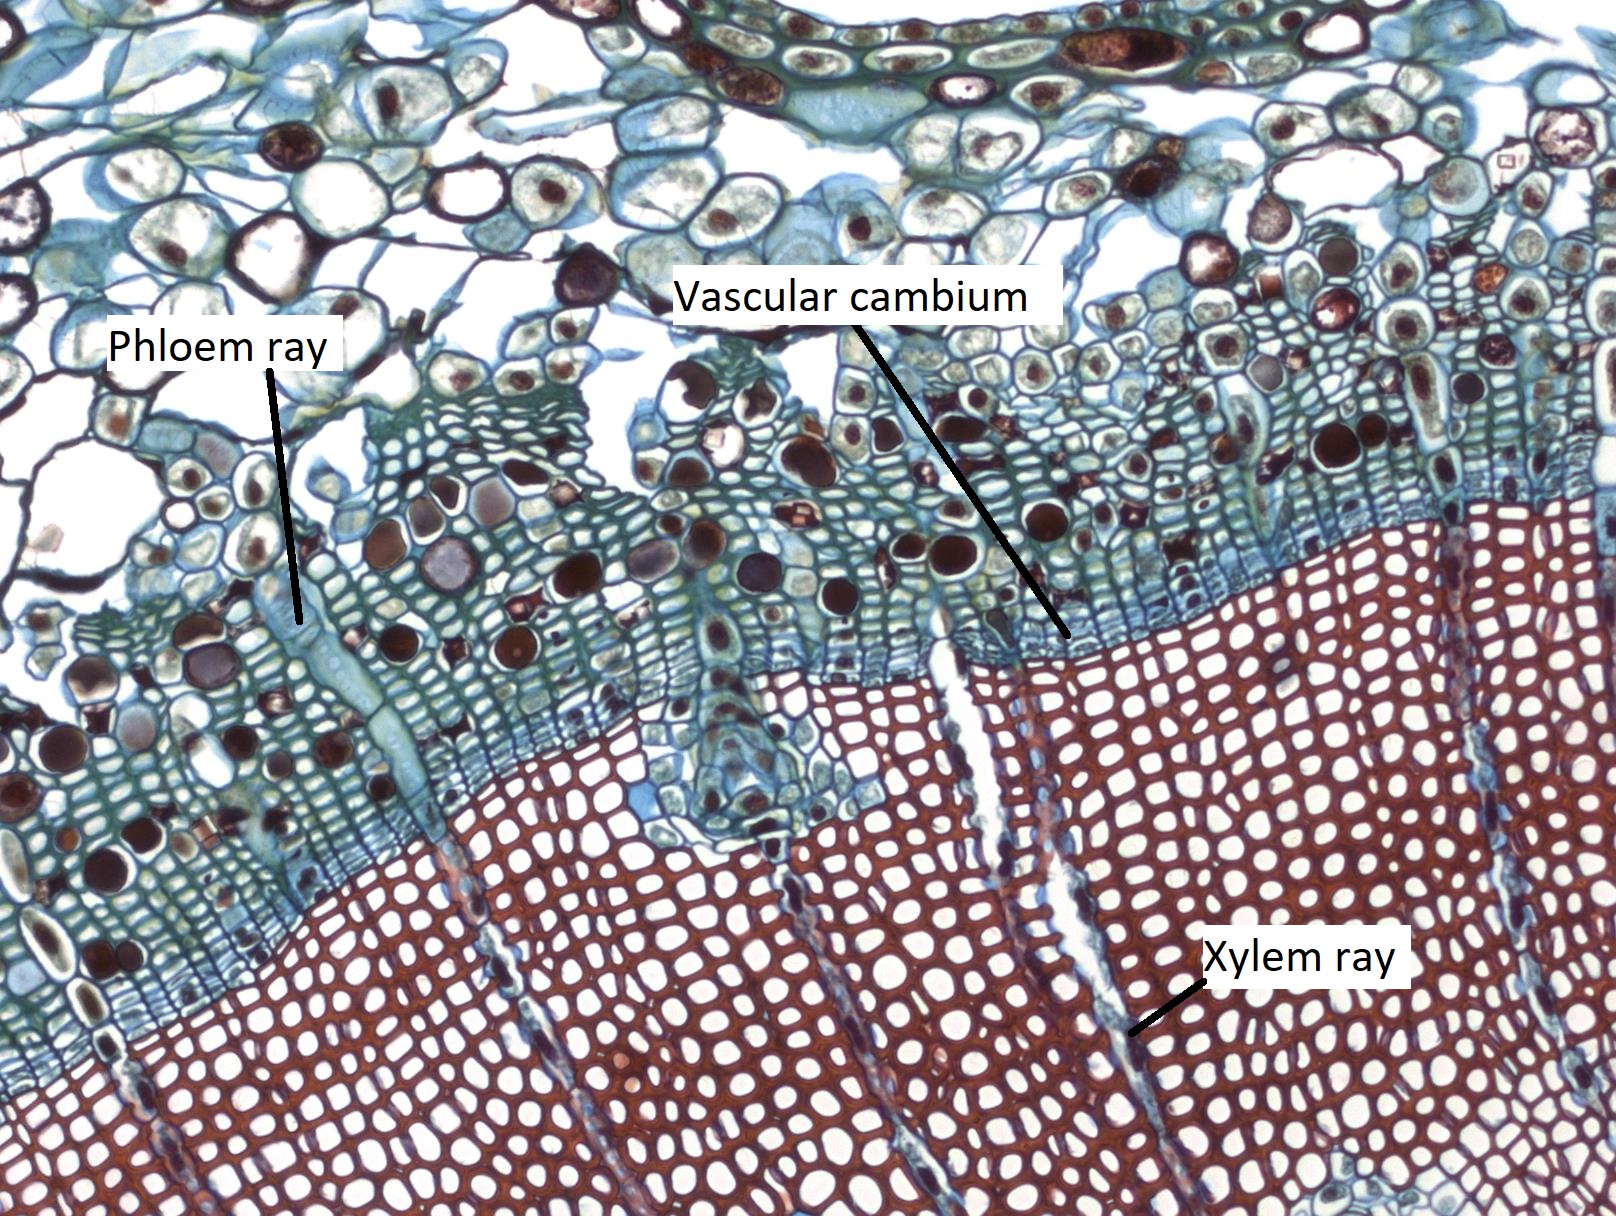 A close up on the vascular tissue in the pine stem